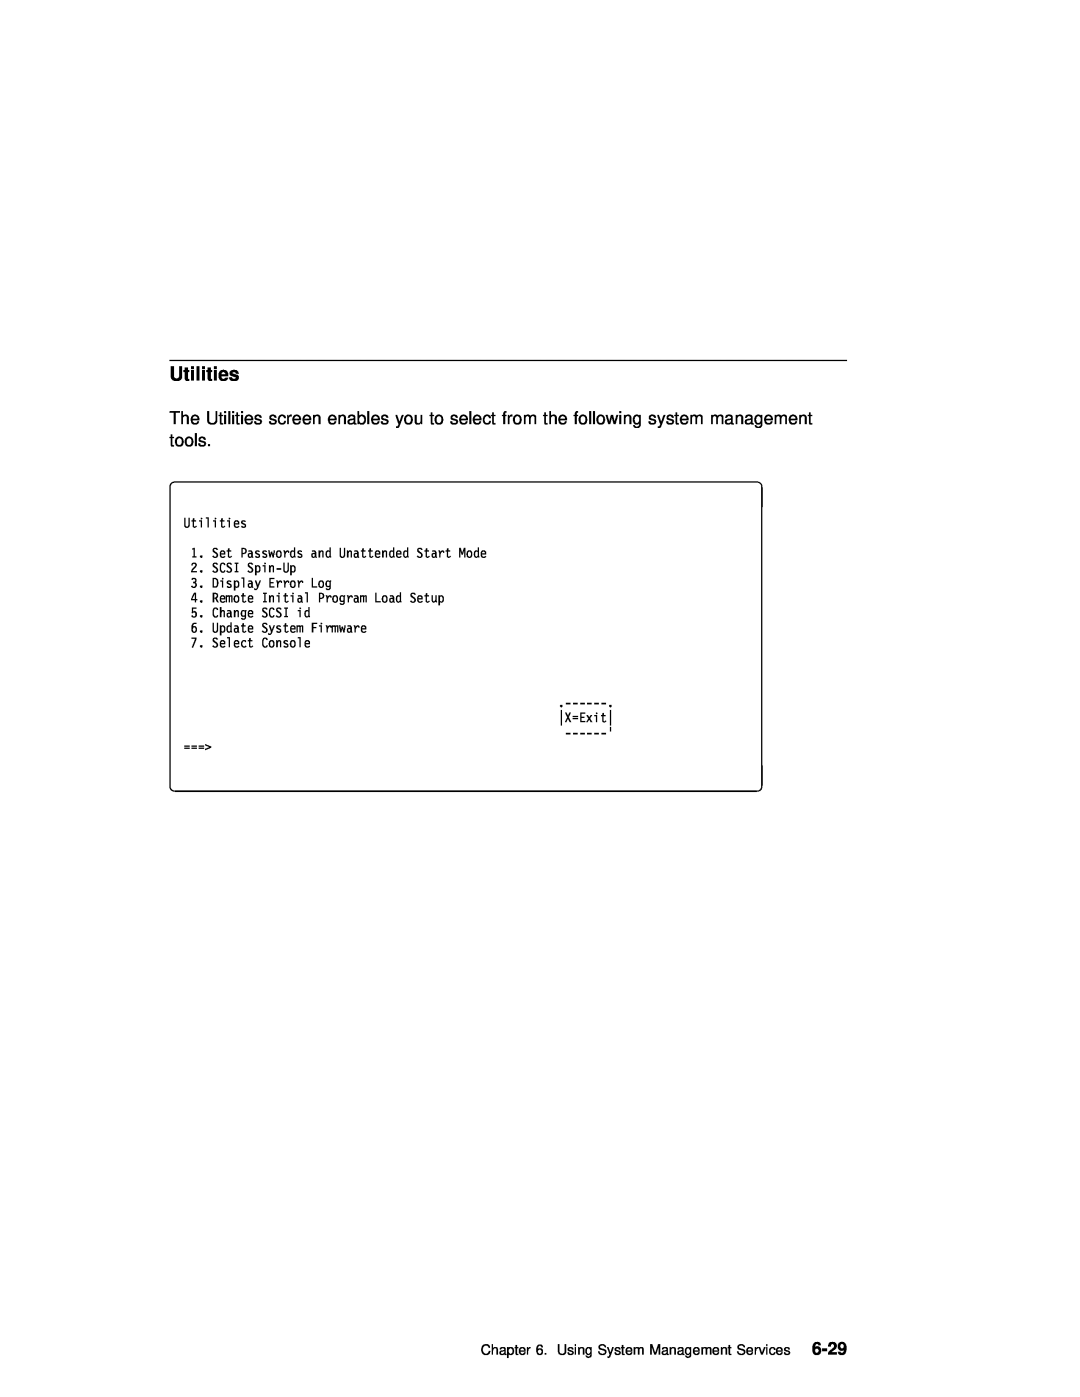 IBM B50 manual 6-29, Utilities 1. Set Passwords and Unattended Start Mode 2. SCSI Spin-Up, X=Exit 